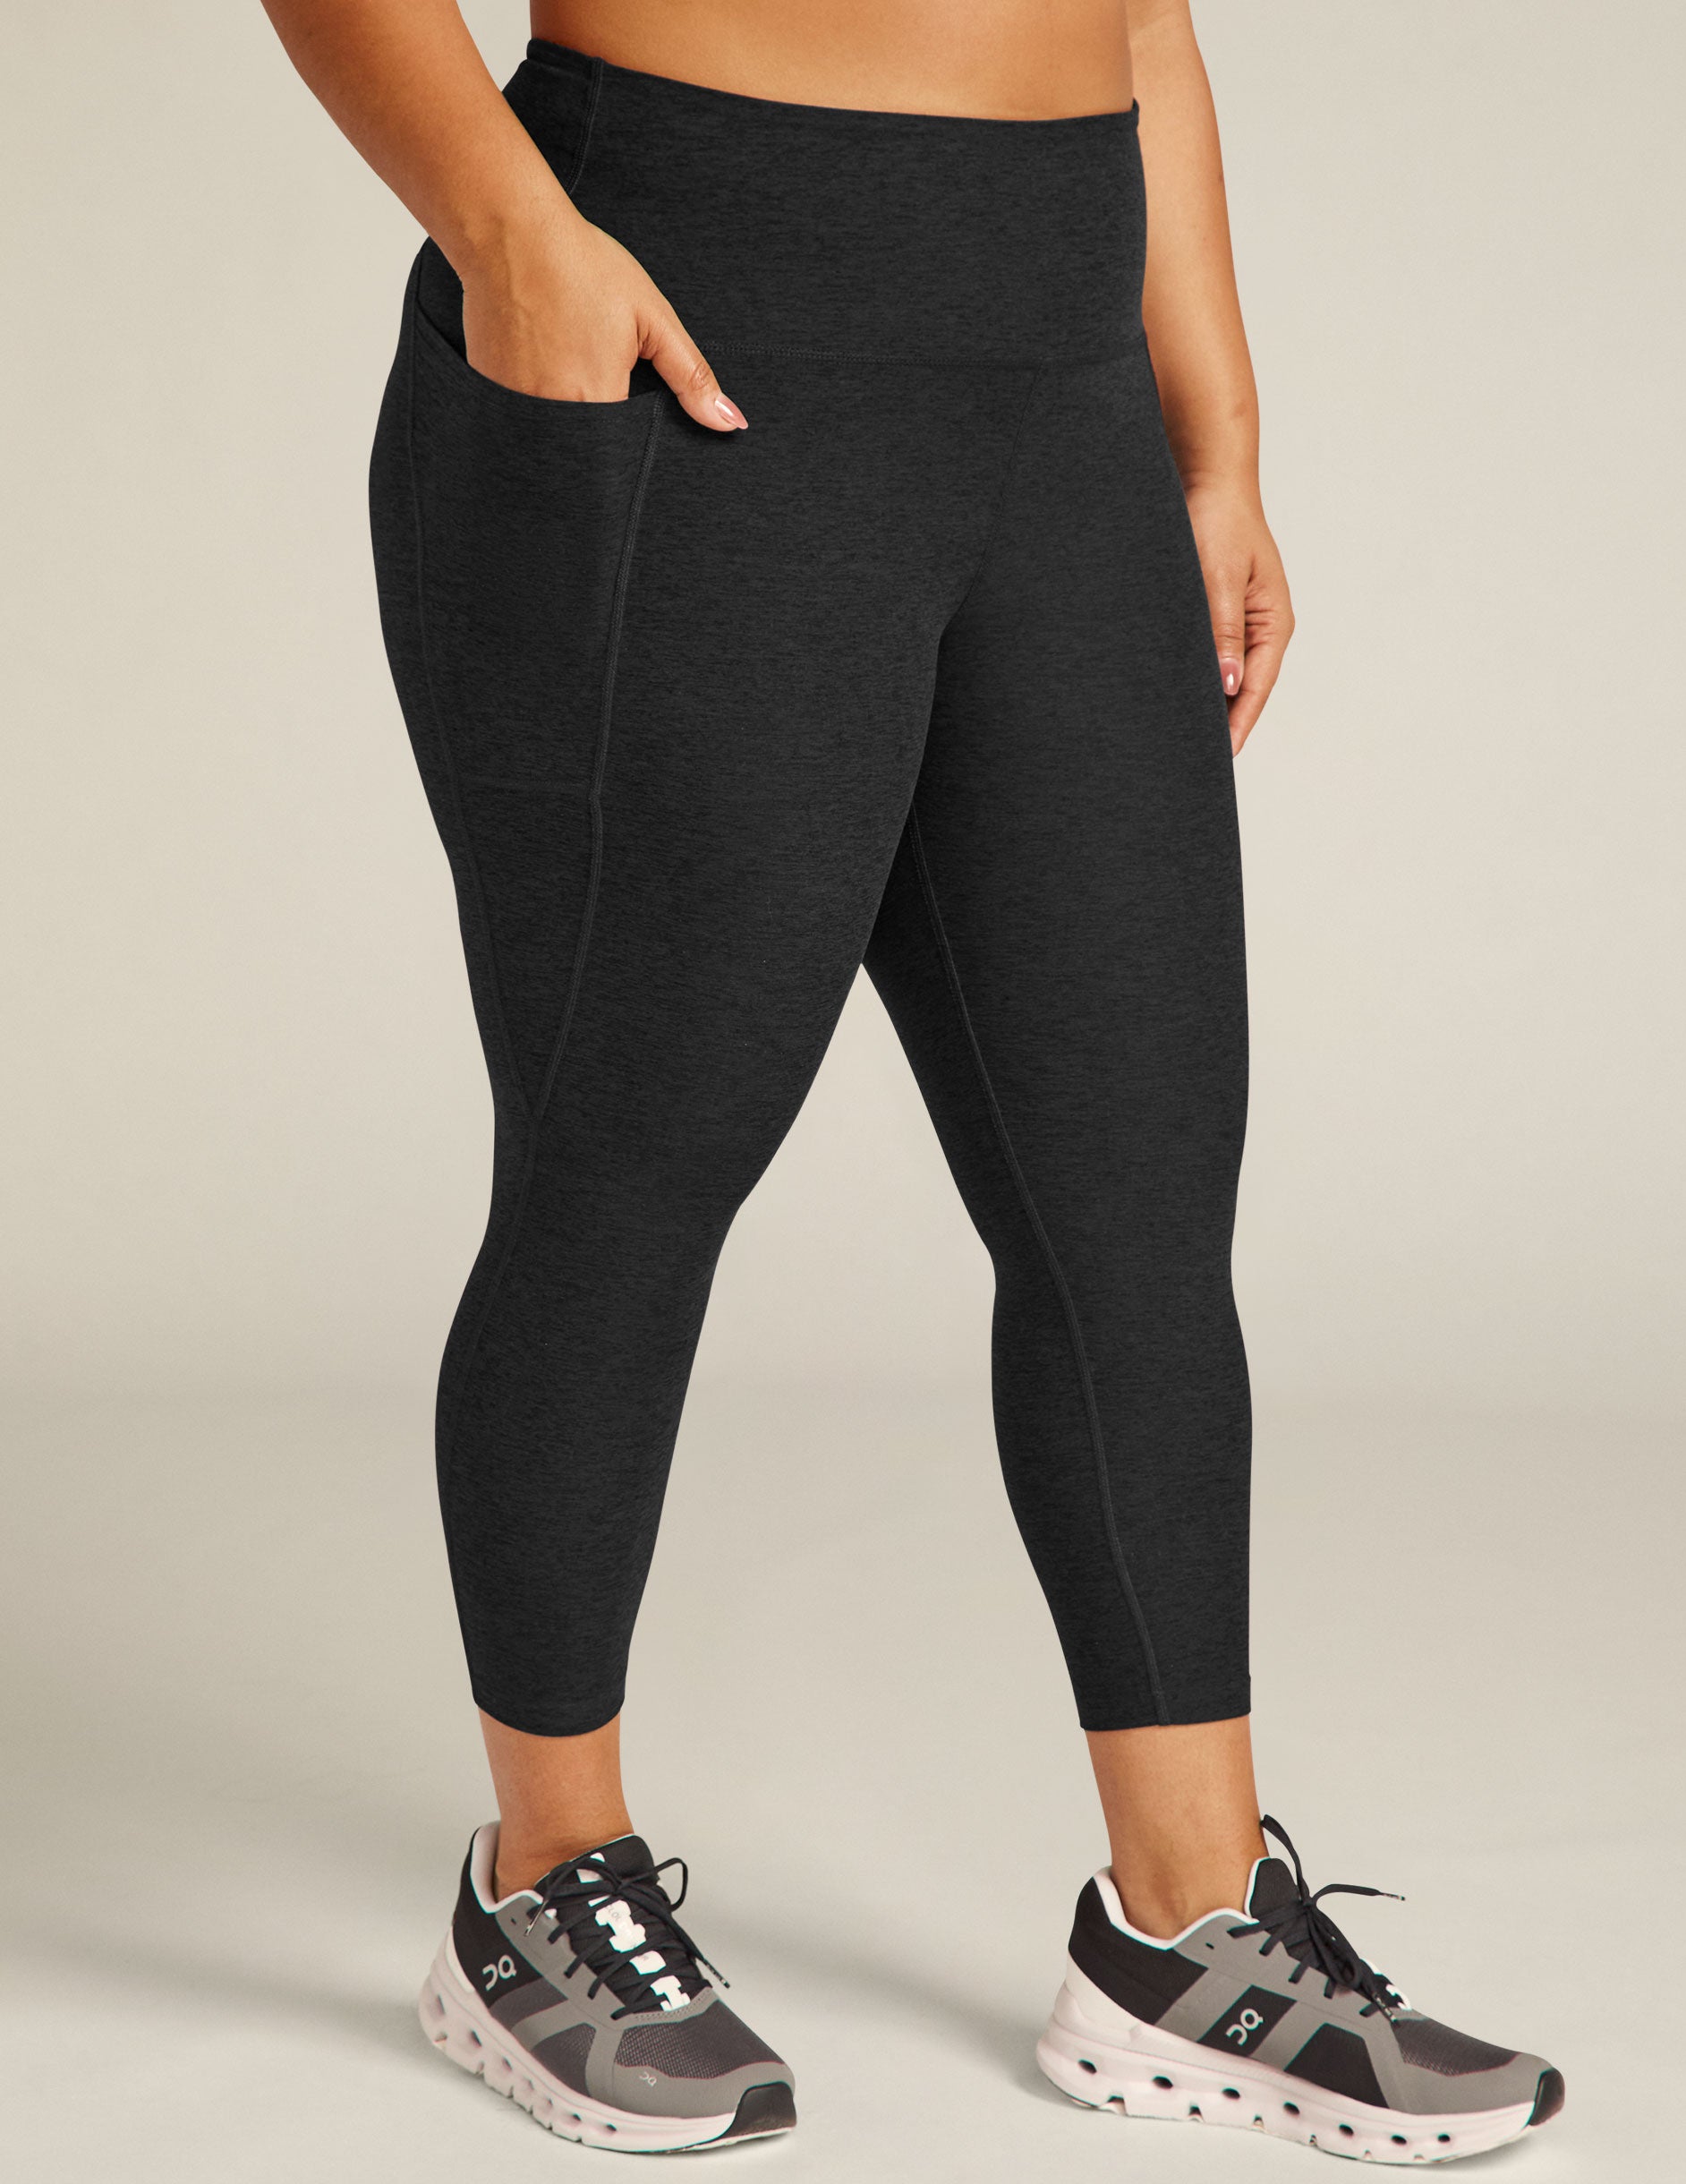 Workout Leggings for Womens with Pockets High Waisted Compression (Black,Size:8)